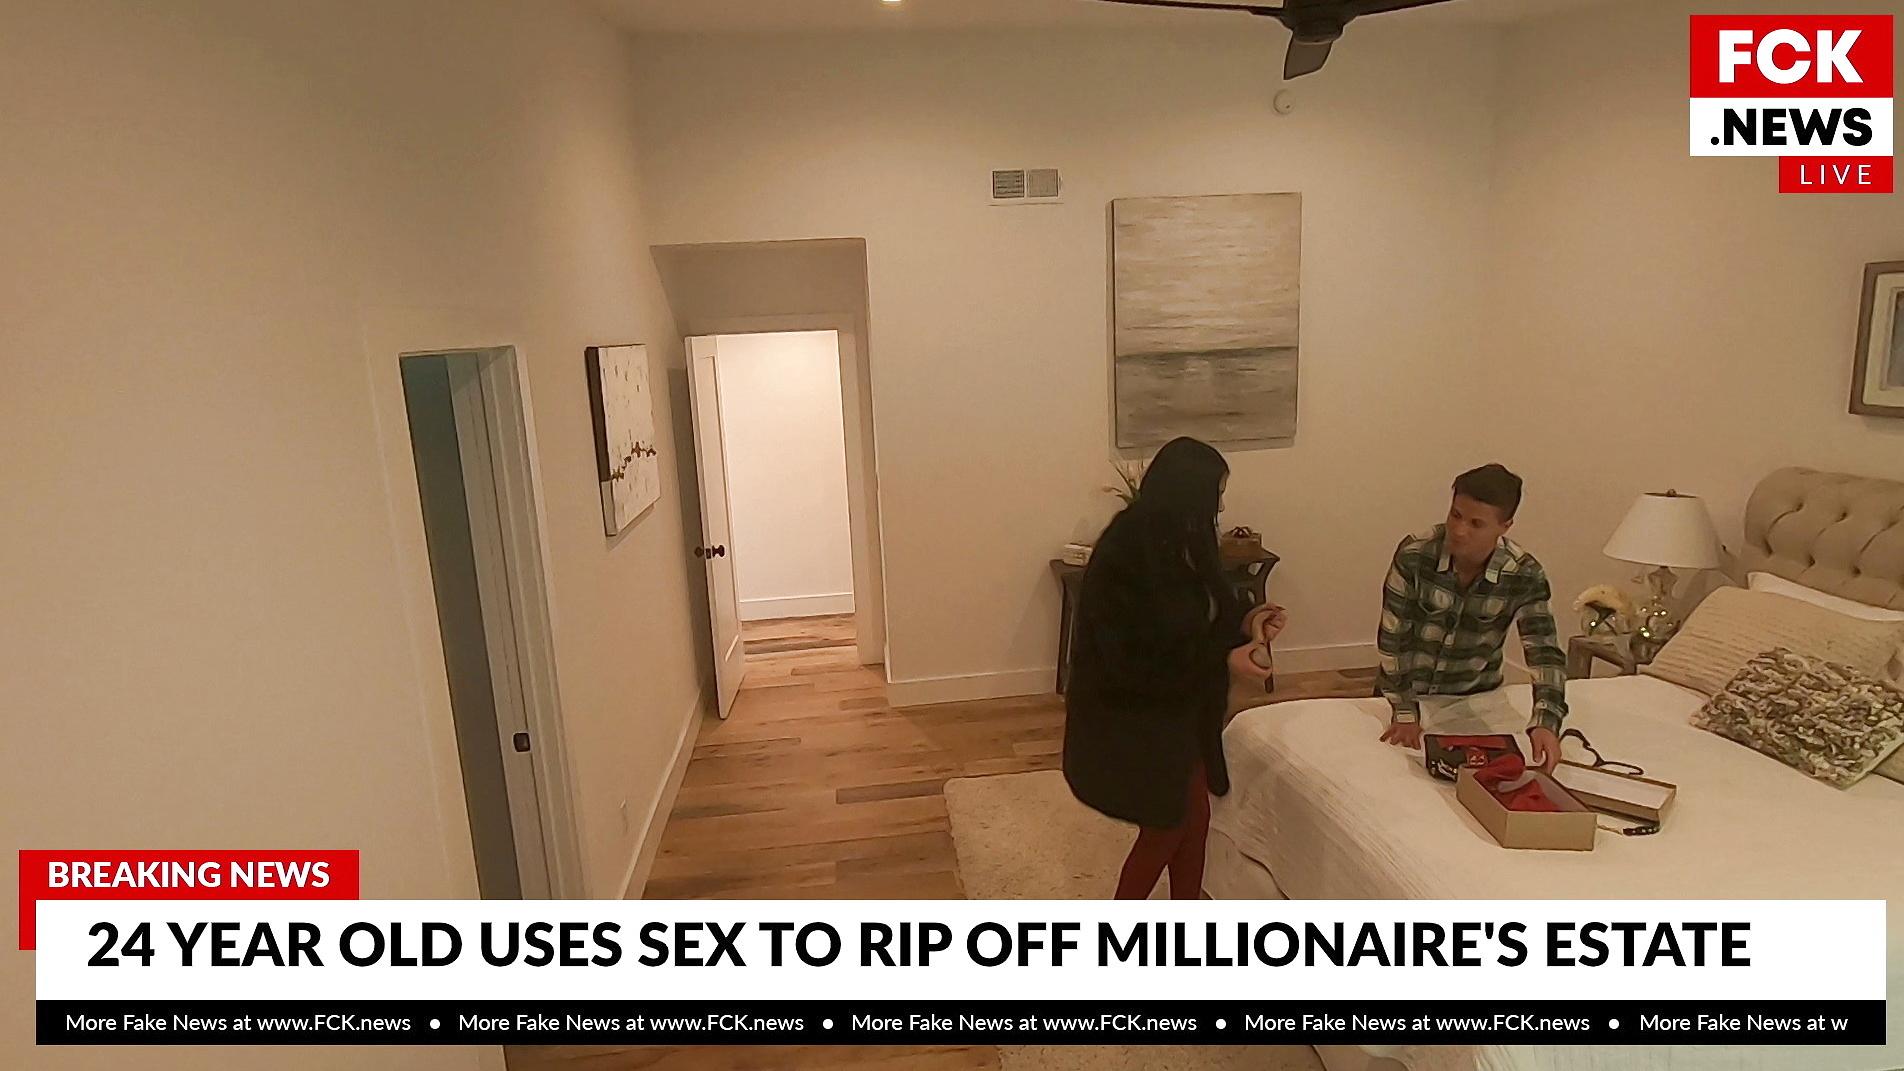 Carolina Cortez uses sex to steal from a millionaire bang photo